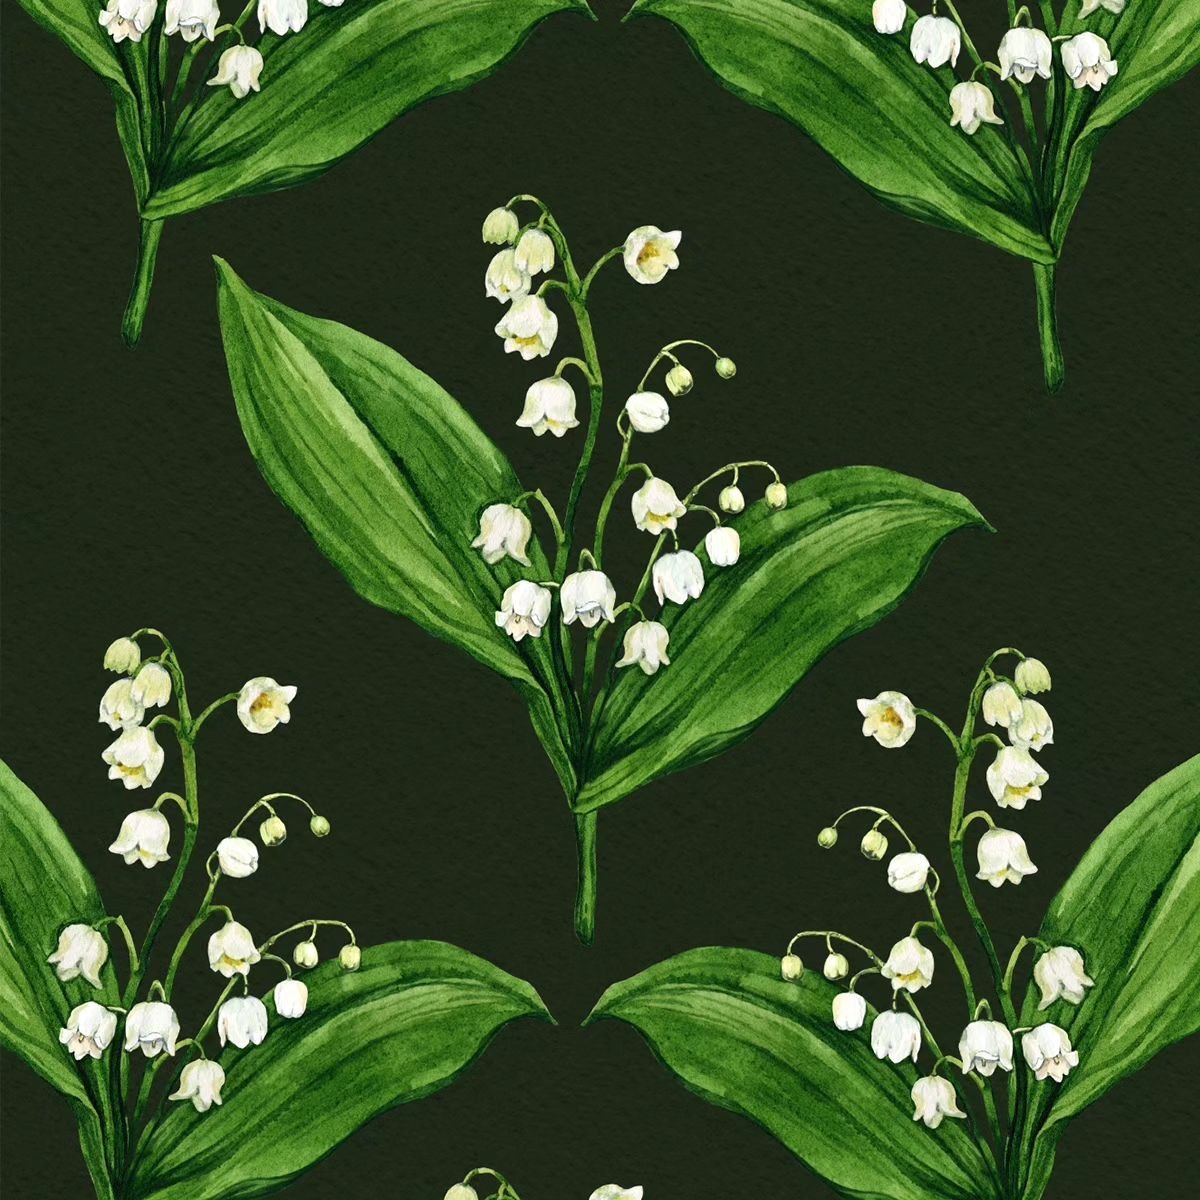 New Lily of the Valley pattern I made recently💚
.
#patterndesigner #patterndesign #lilyofthevalley #floraldesign #flowerpattern #flowerpatterns #floralpatterndesign #watercolorpattern #watercolorartist